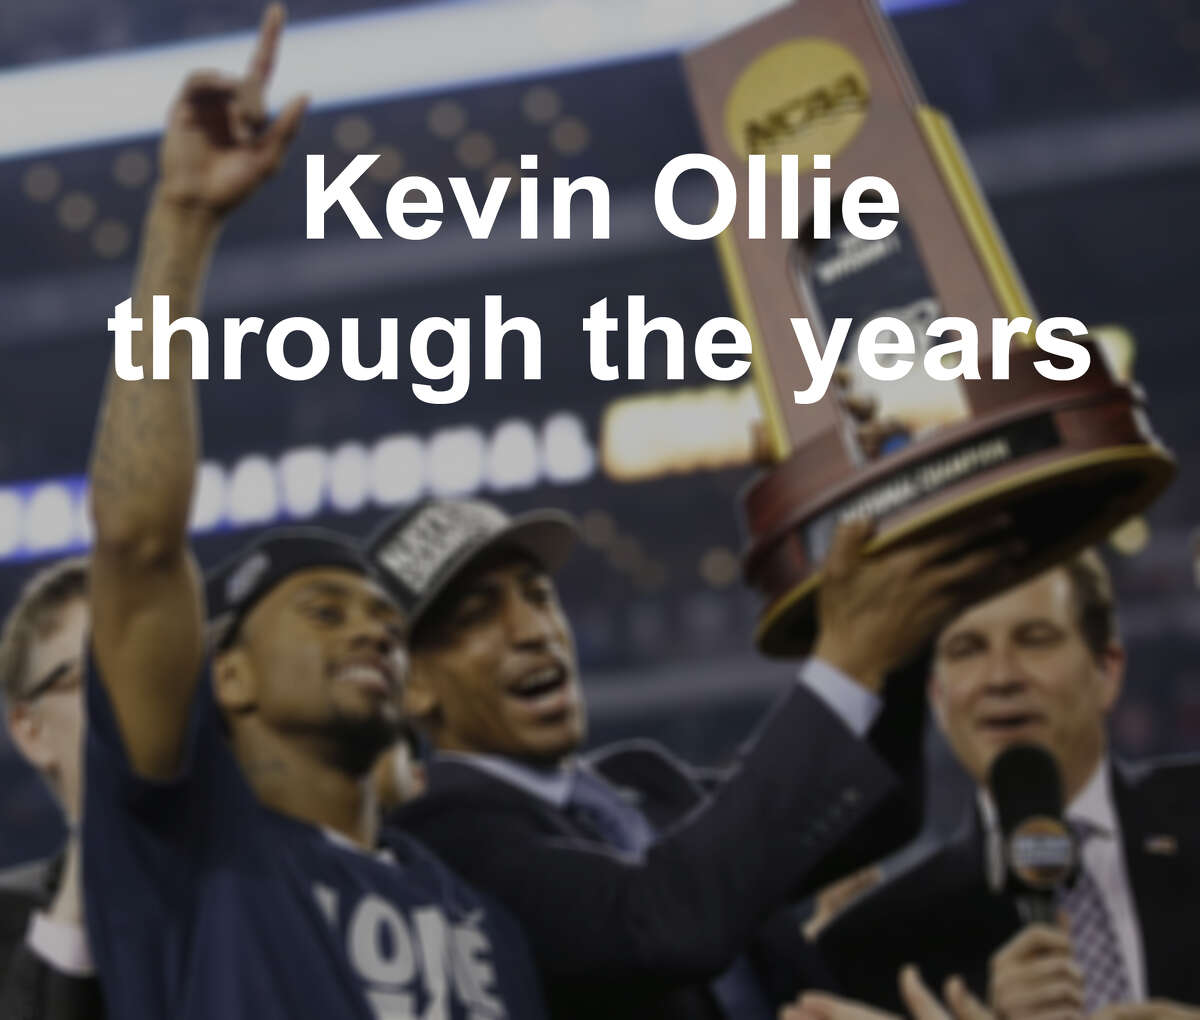 Kevin Ollie through the years